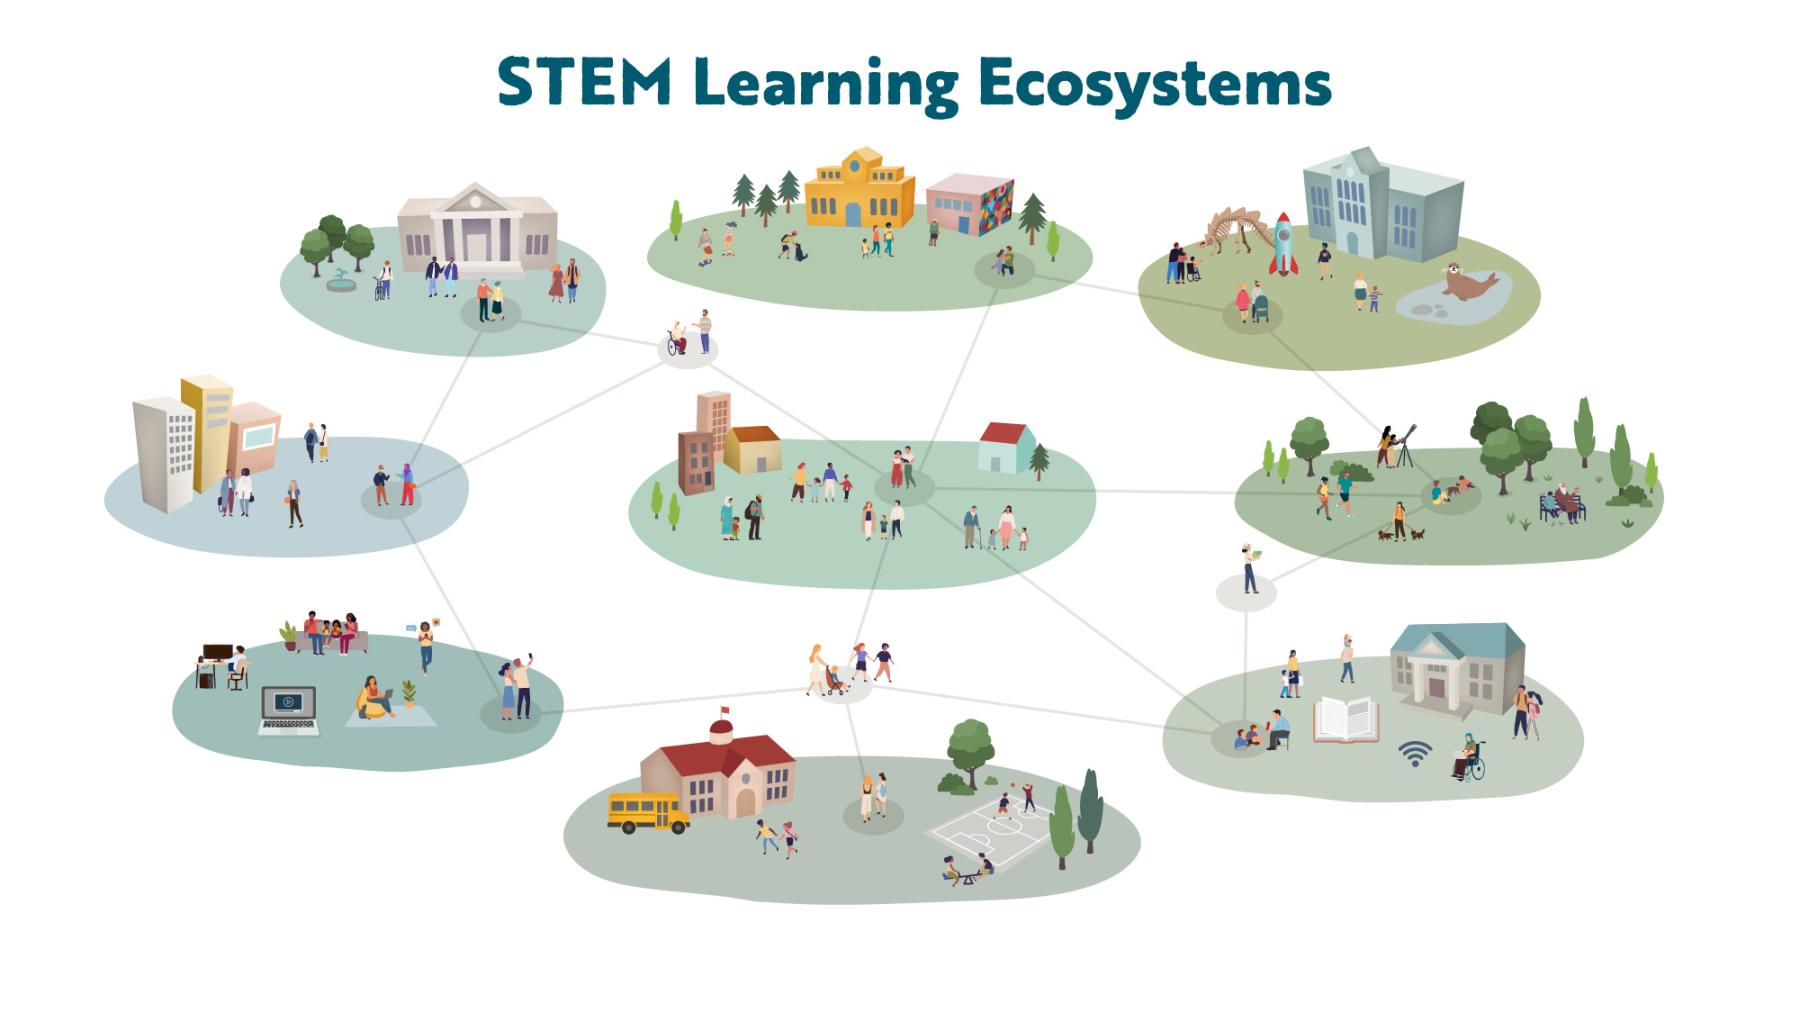 STEM Learning Ecosystem generalized example without any text labels